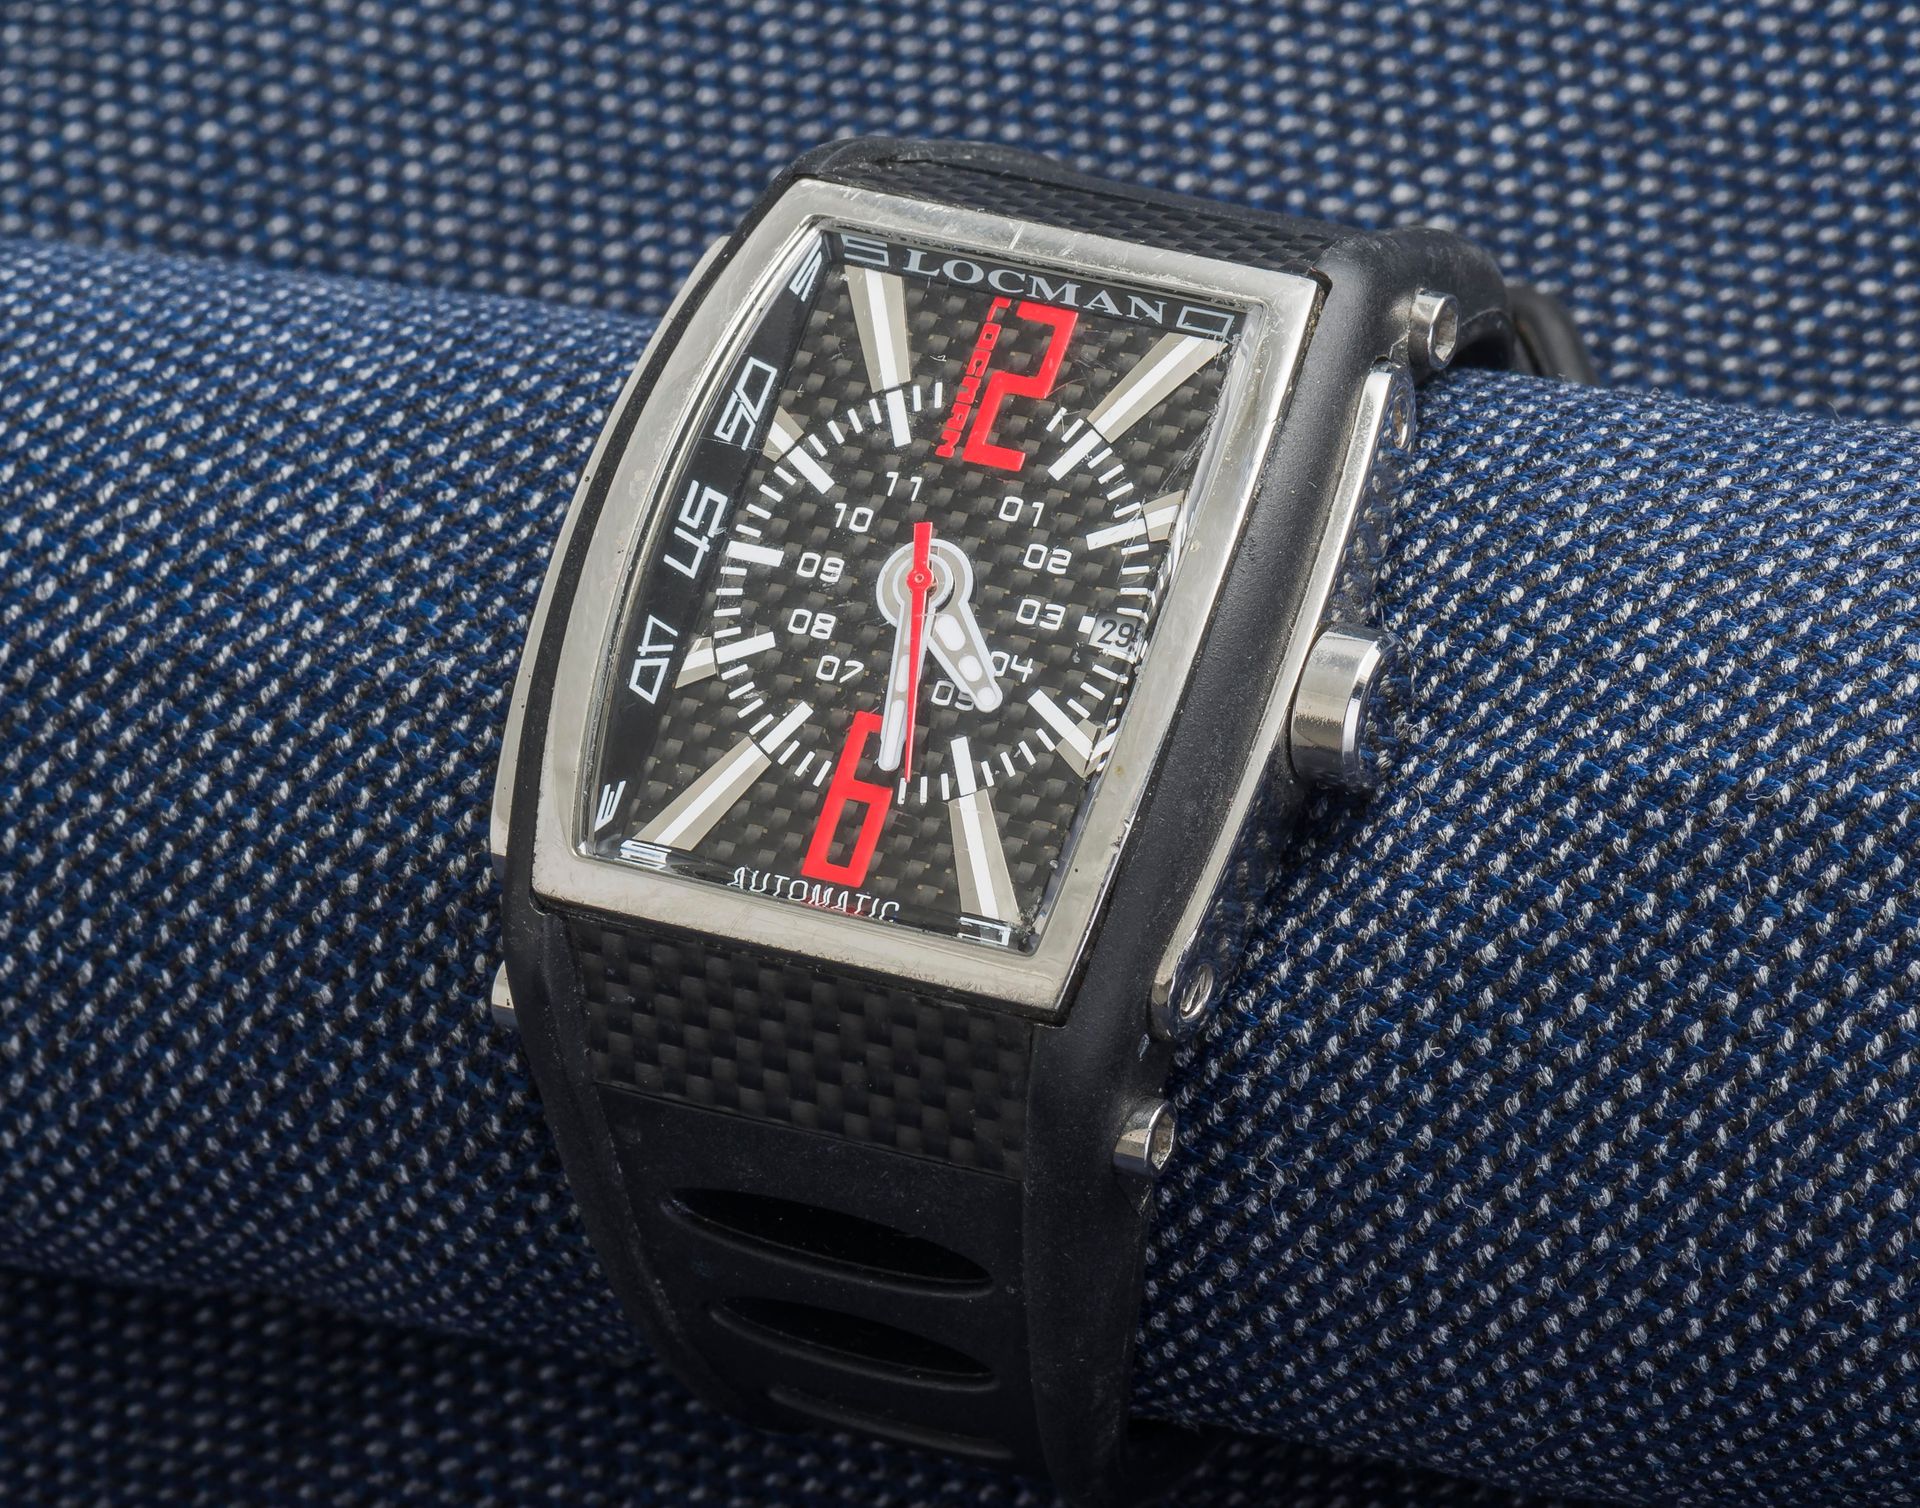 LOCMAN Tremila watch ref 263, the large carbon fiber and titanium case with scre&hellip;